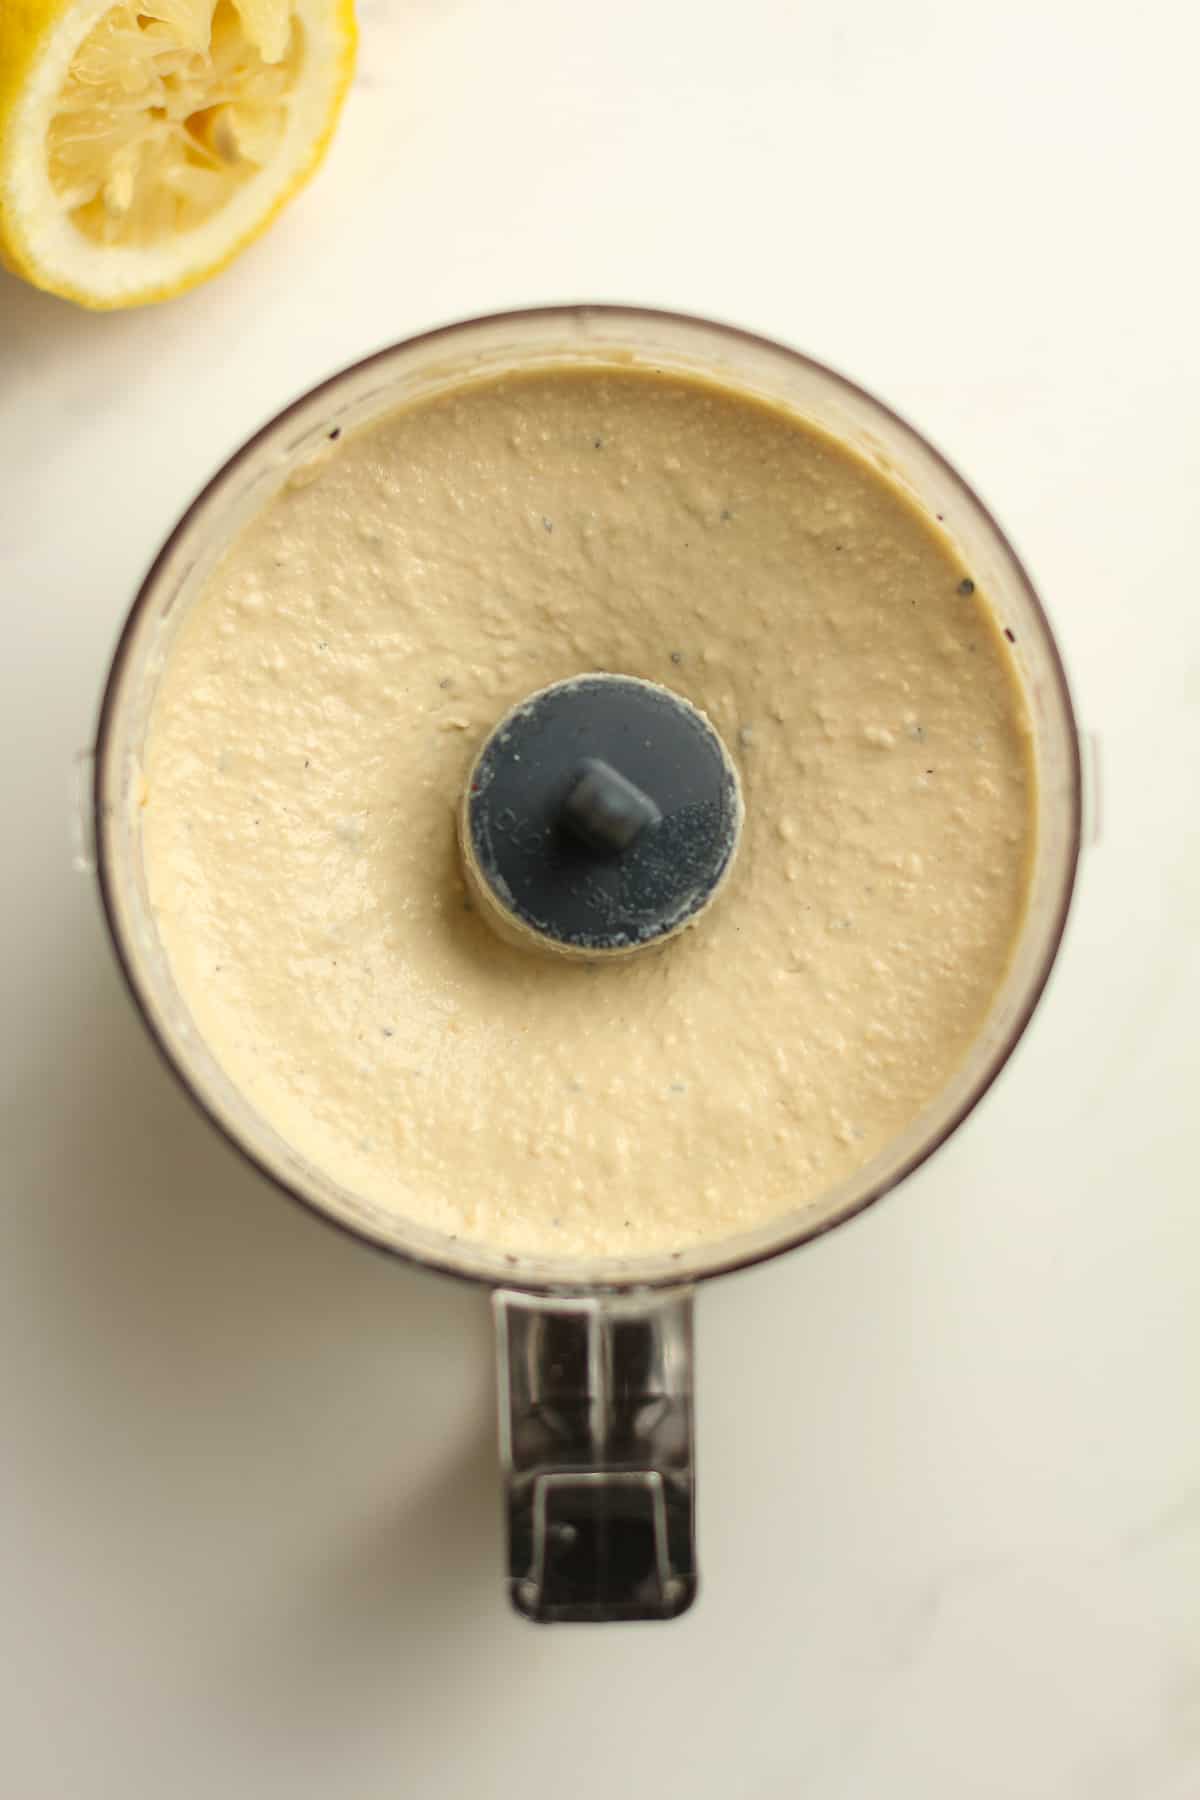 The blended hummus in a small food processor.